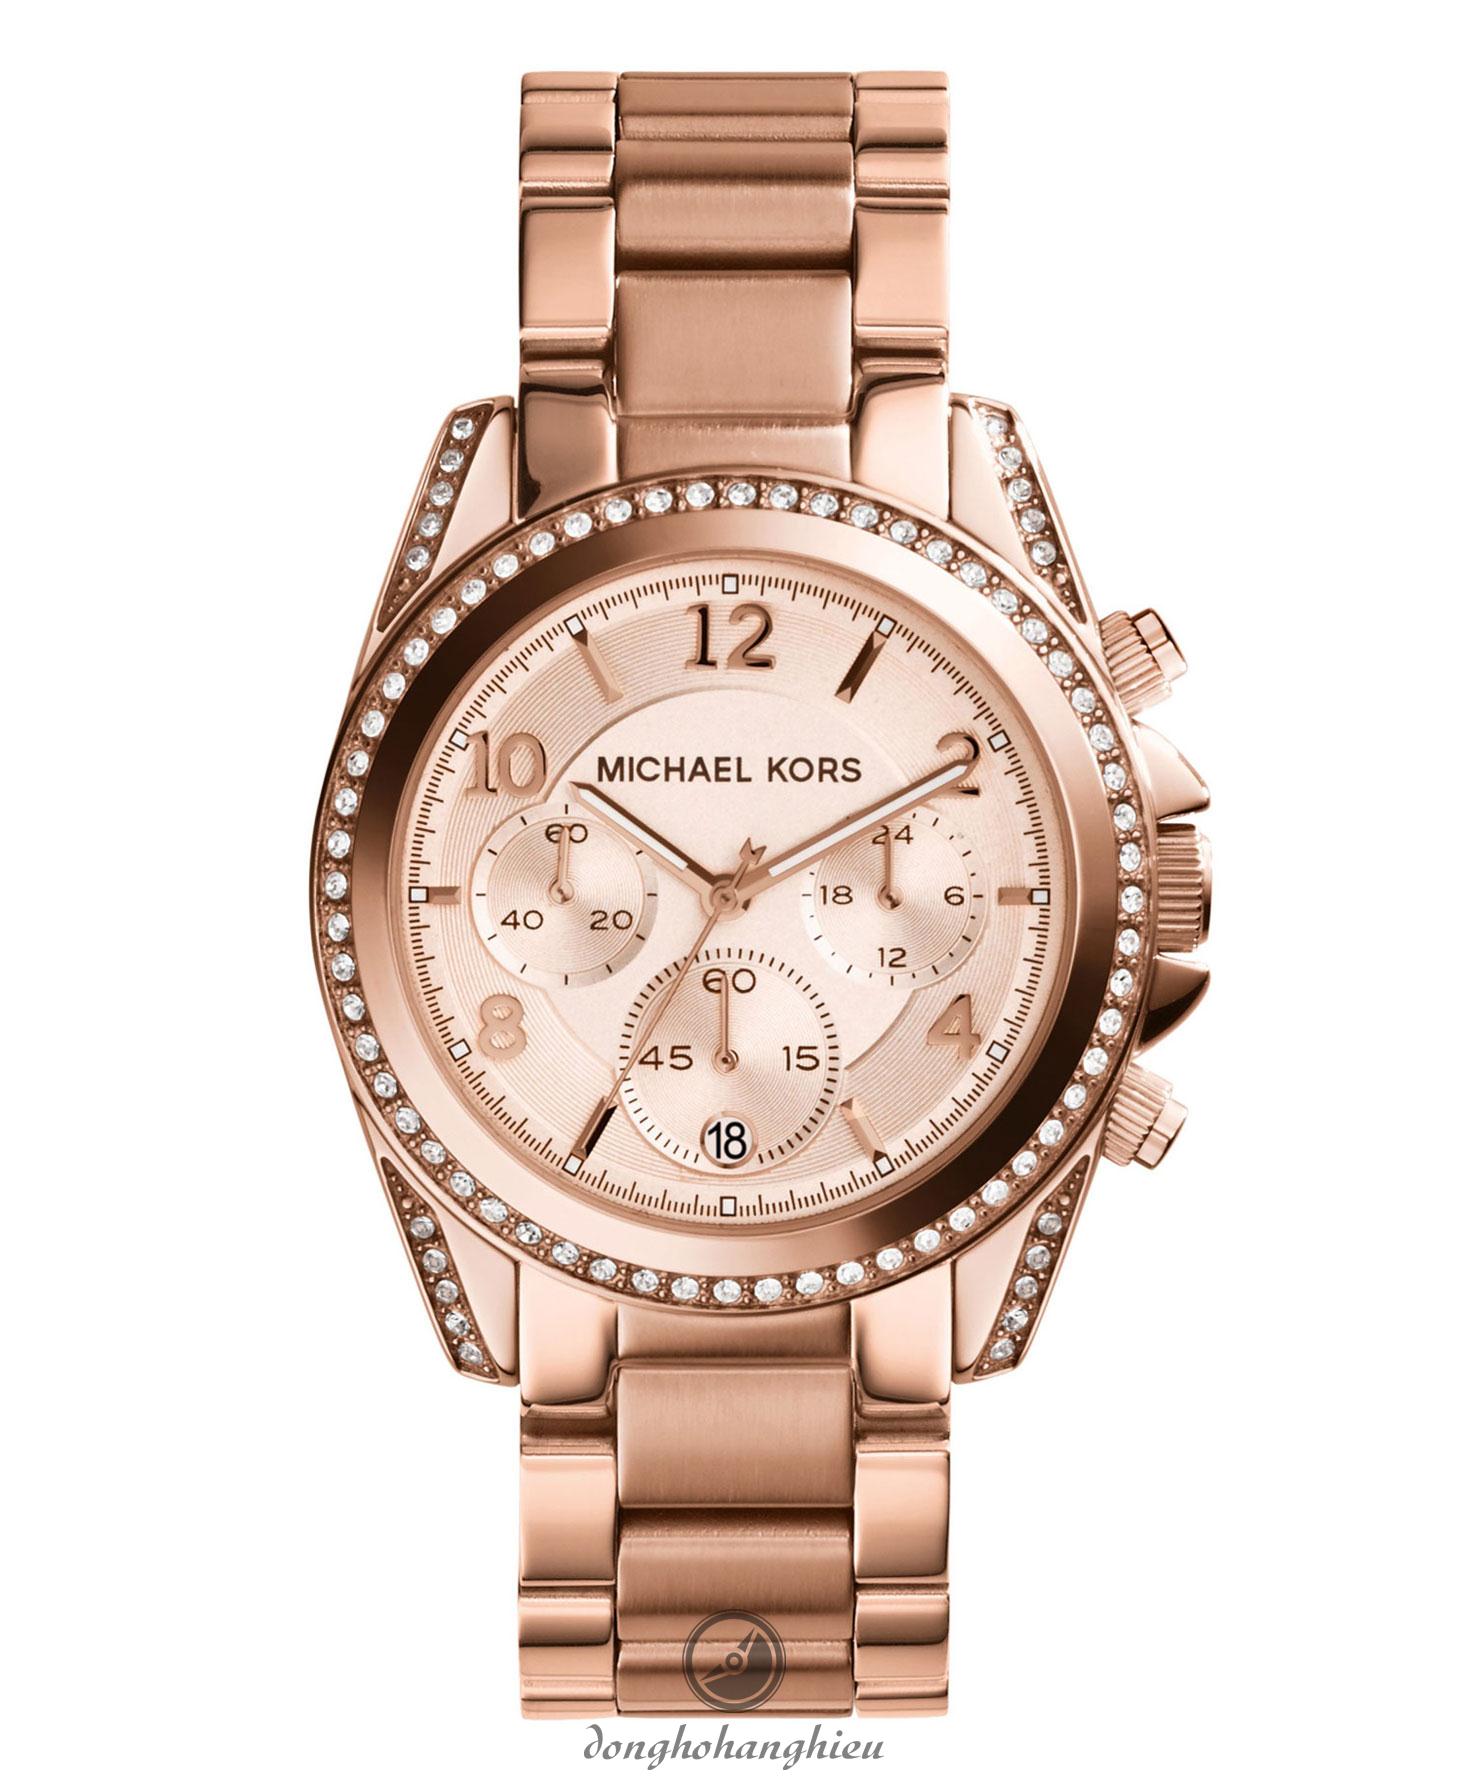 Michael Kors brings luxury to smart watches Will they sell  CSMonitorcom